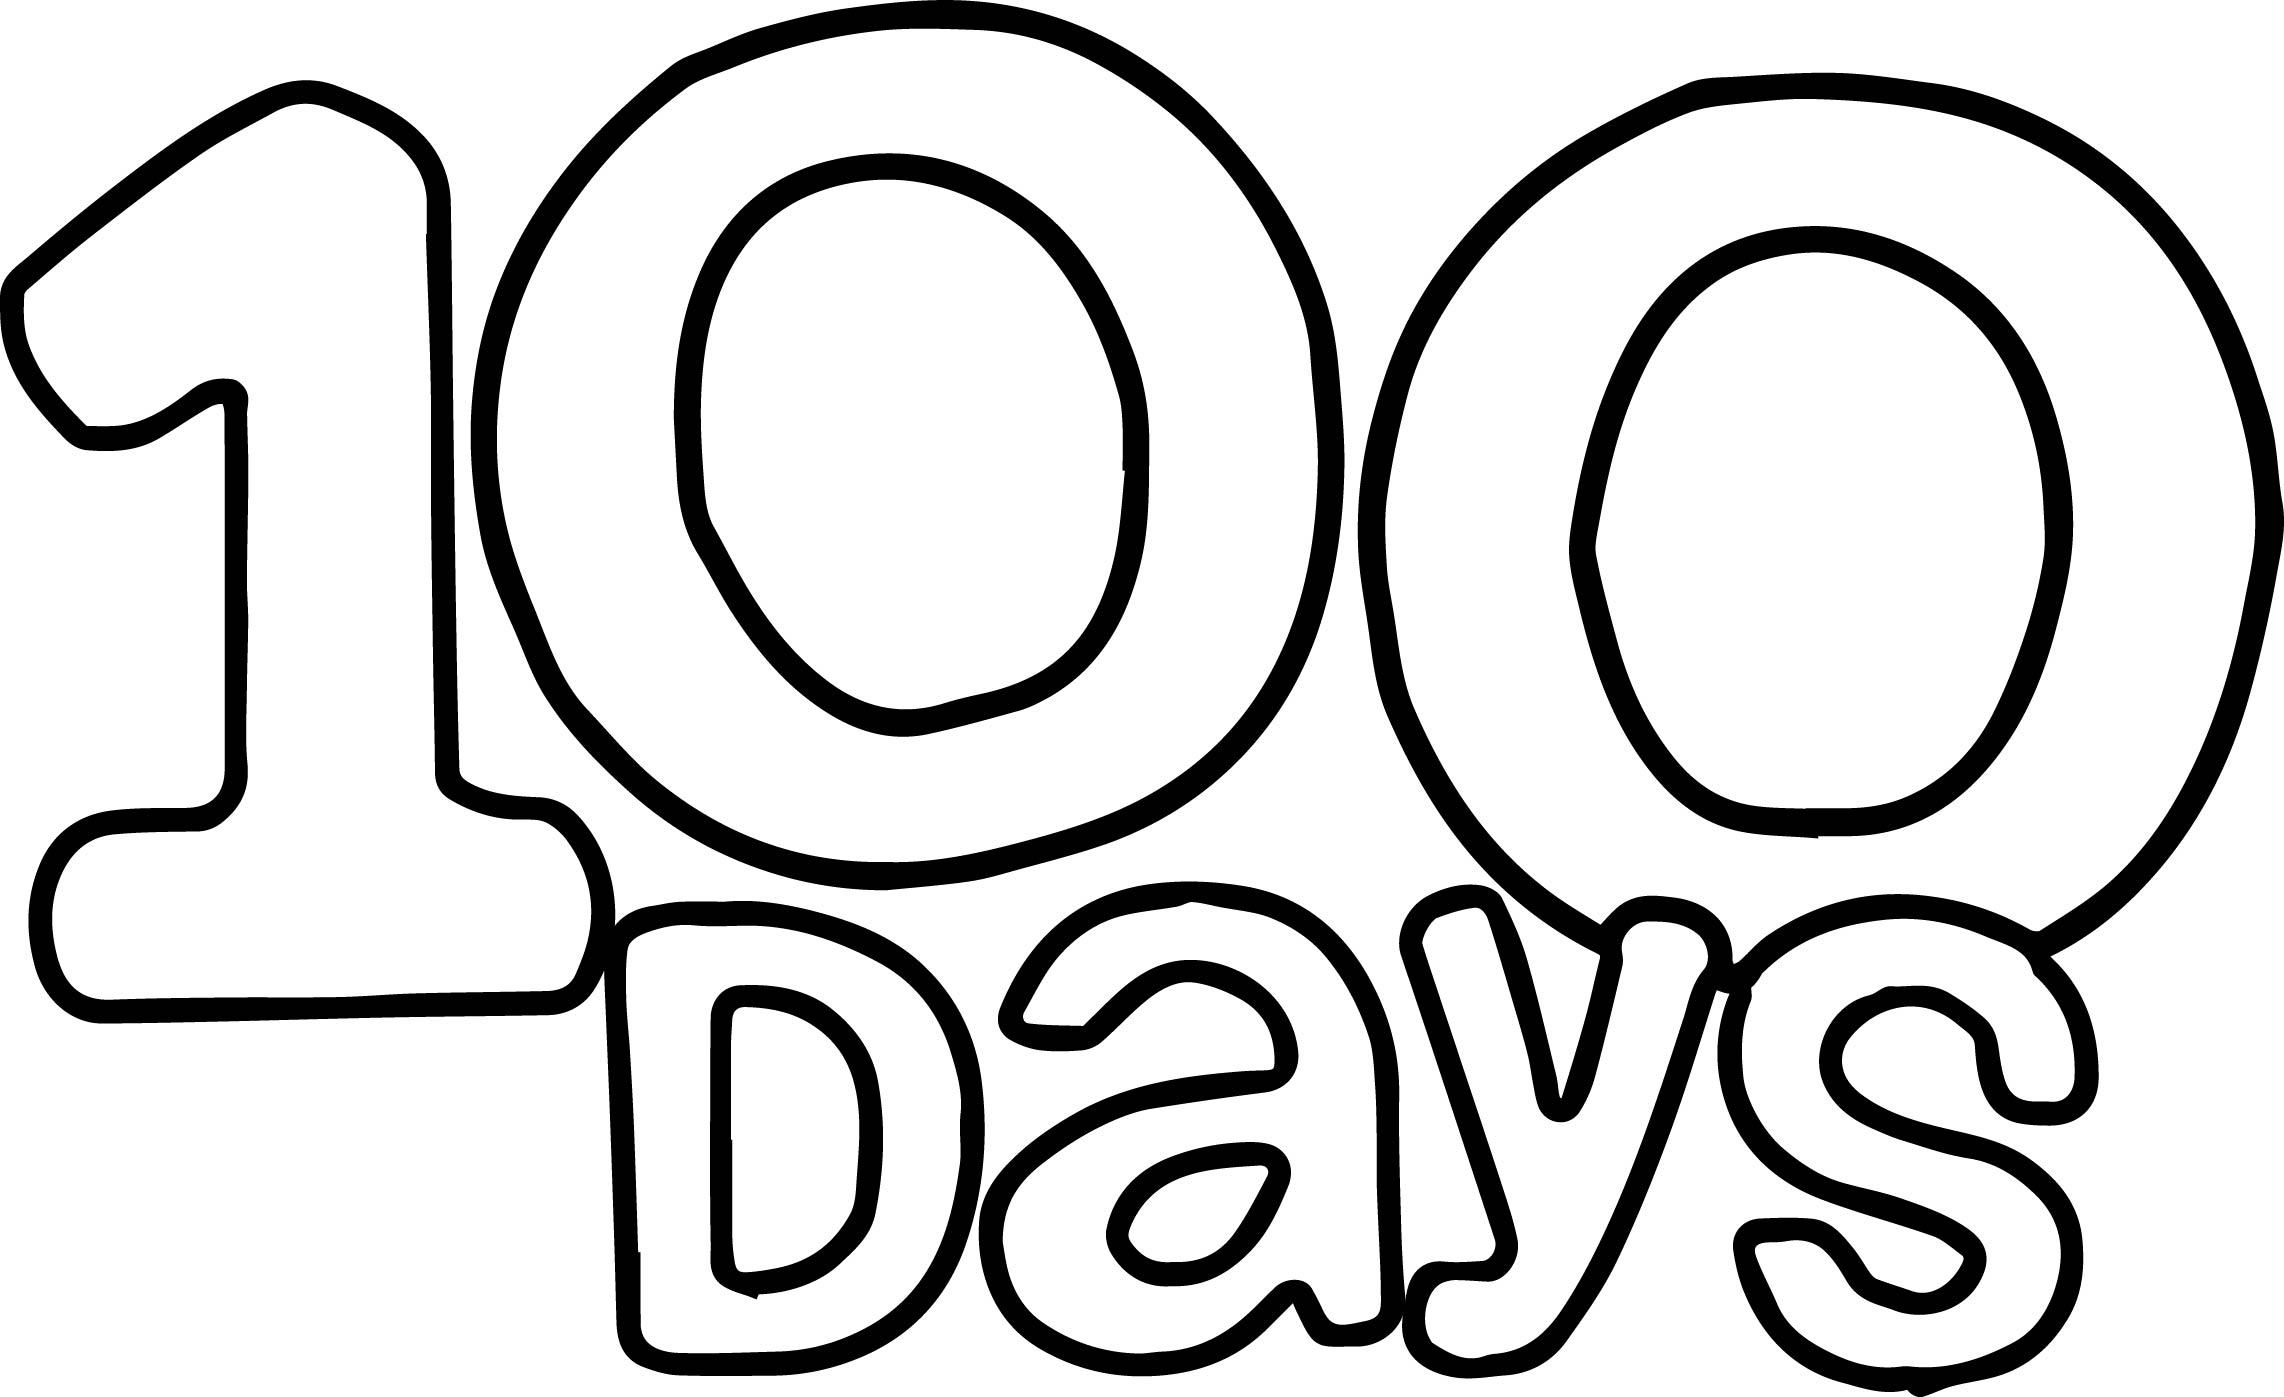 100 Days Text Coloring Page Wecoloringpage